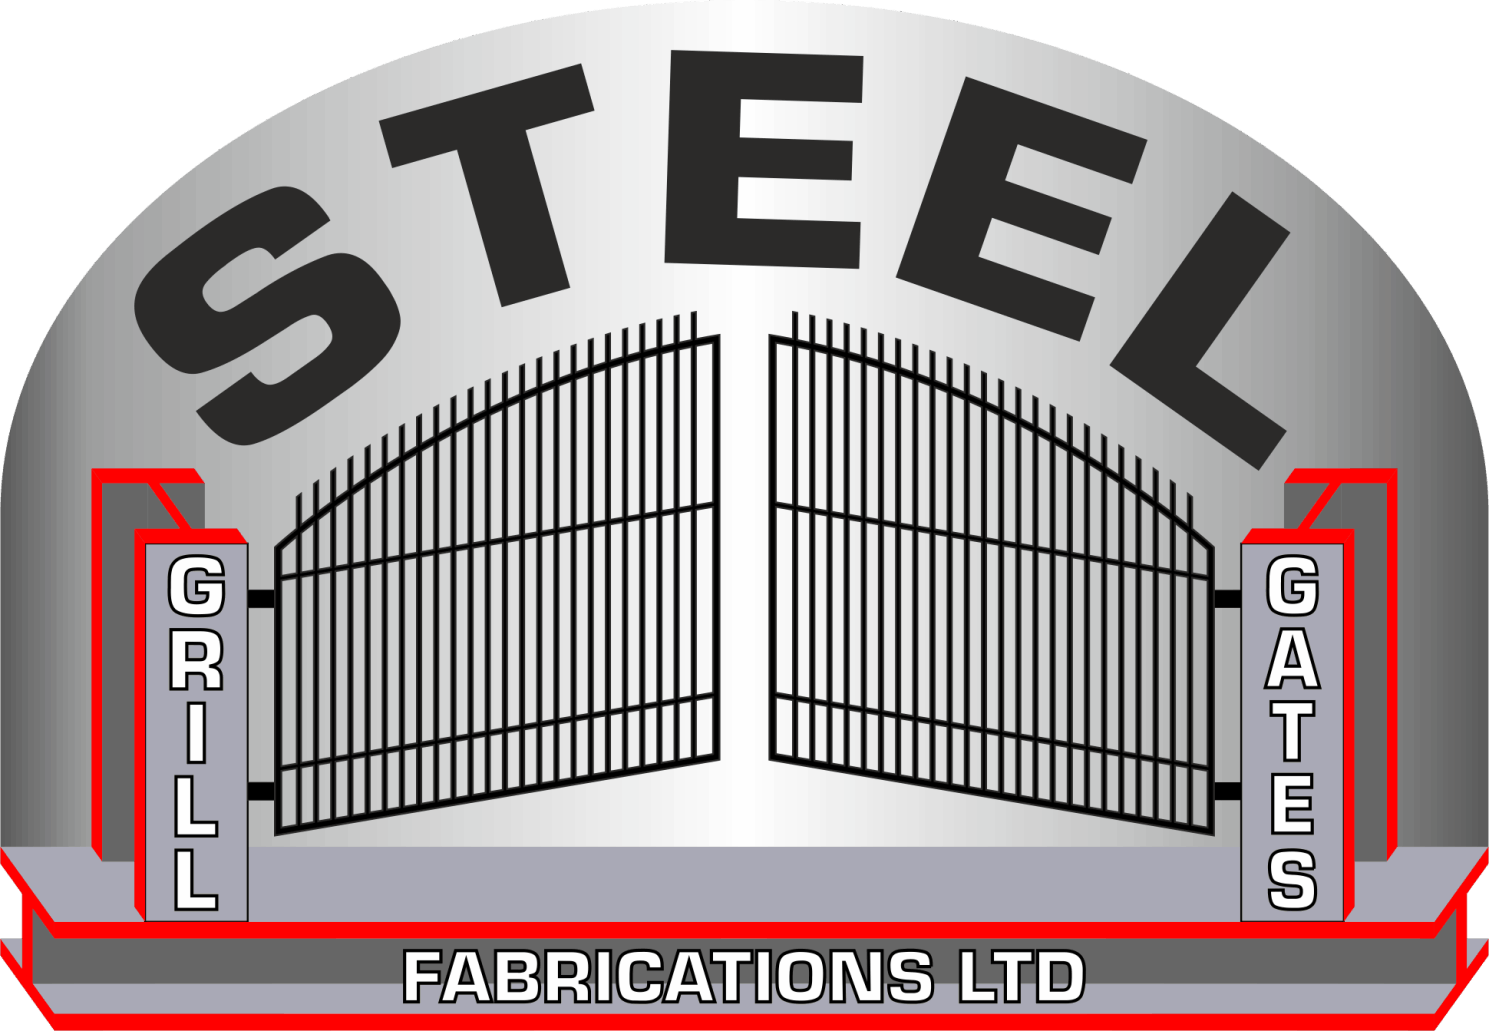 MobiriSteel Gates Grill Fabrications Limited - Your Natural Choice for Steel Gates, Security Gates, Access Control, Steel Fencing, Steel Beams and RSJ Girdersse Website Builder